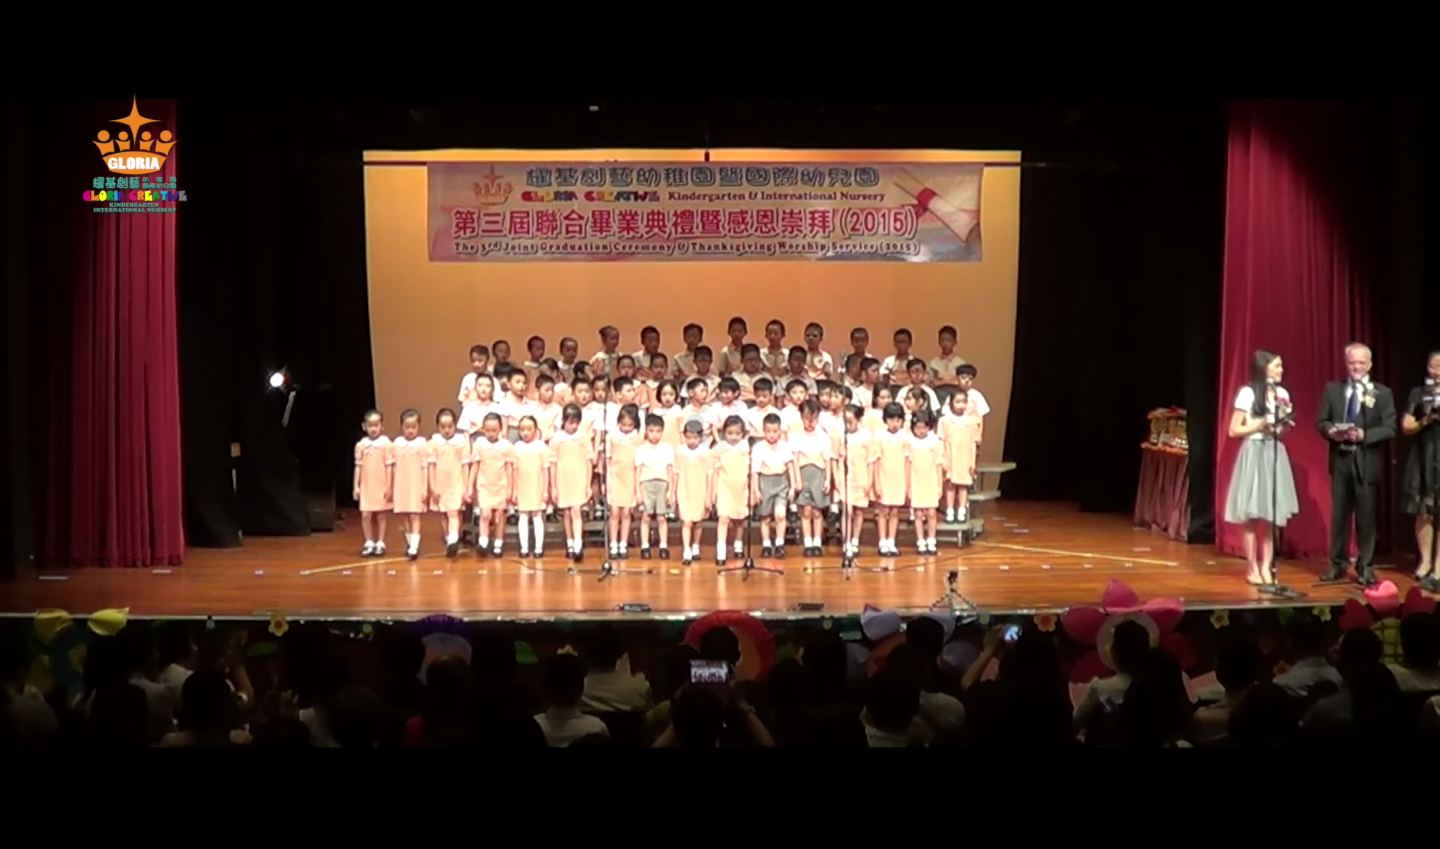 Photo of 【Video】The 3rd Joint Graduation Ceremony & Thanksgiving Worship Service (2015)